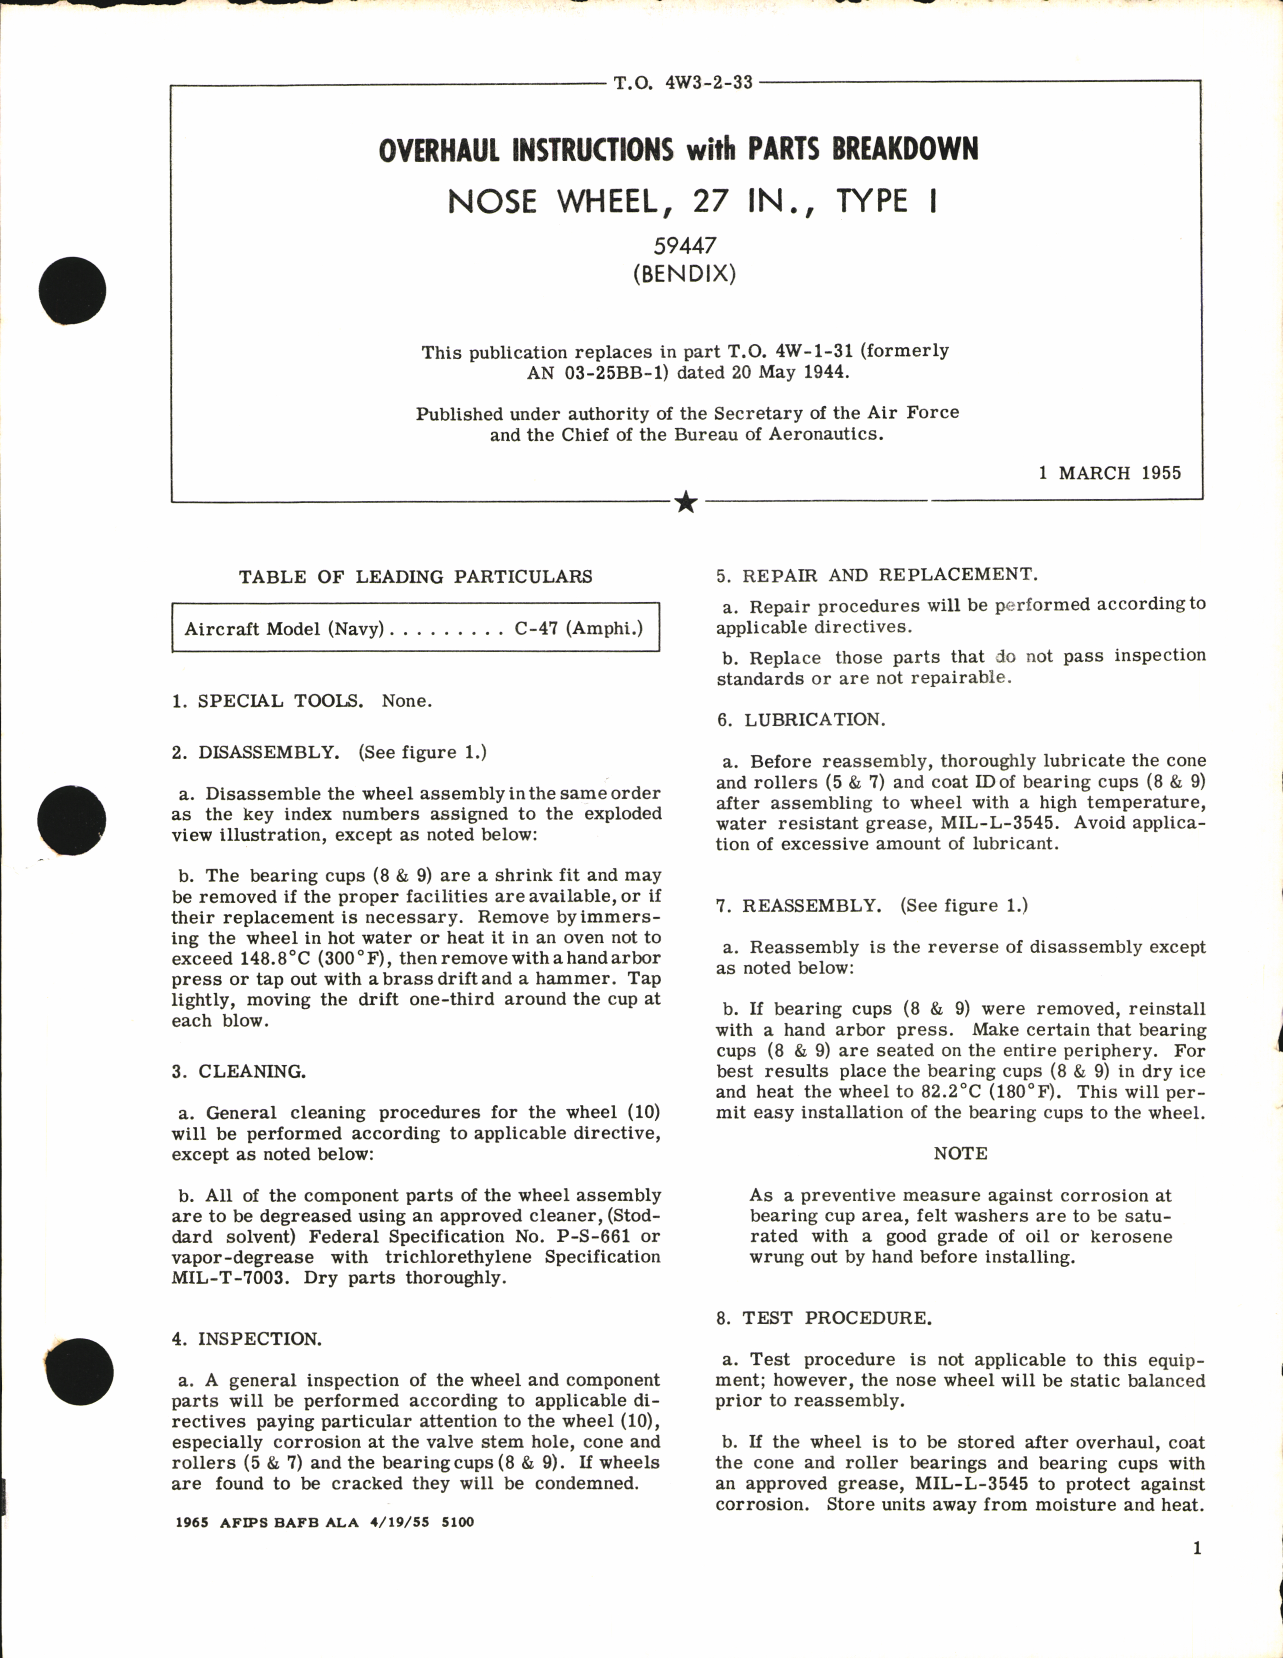 Sample page 1 from AirCorps Library document: Overhaul Instructions with Parts Breakdown for Nose Wheel 27 In., Type I